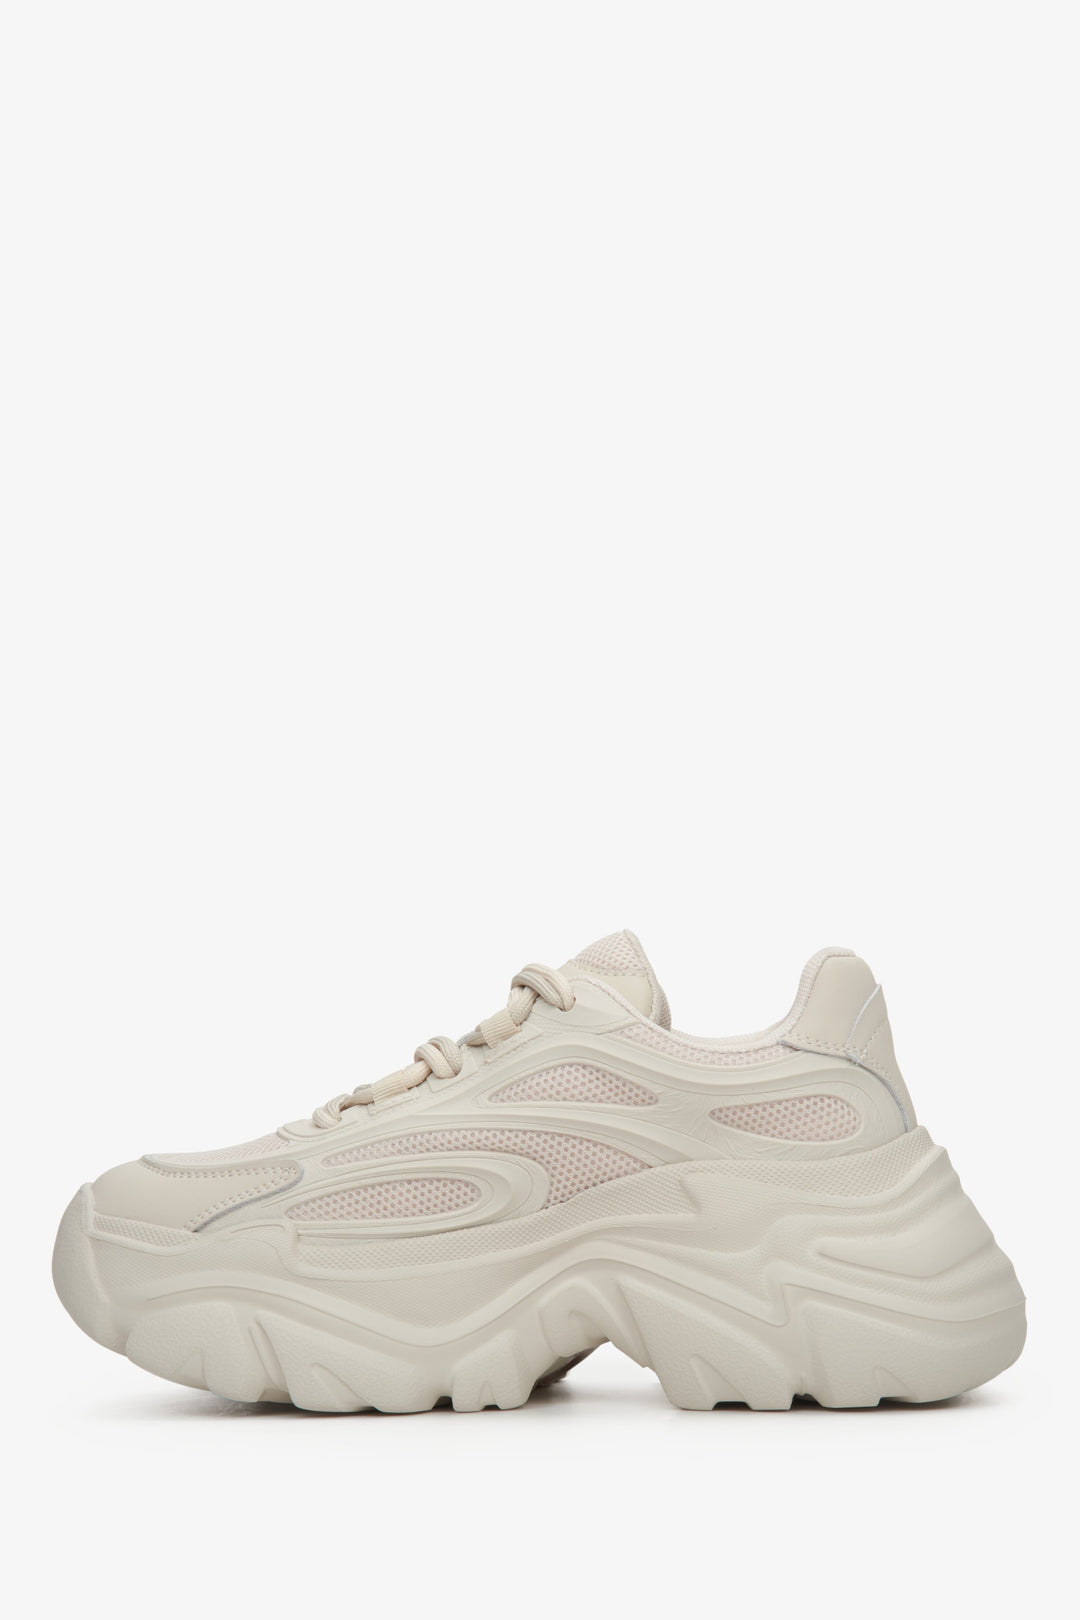 Chunky platfrom women's sneakers in beige, ES 8 brand.